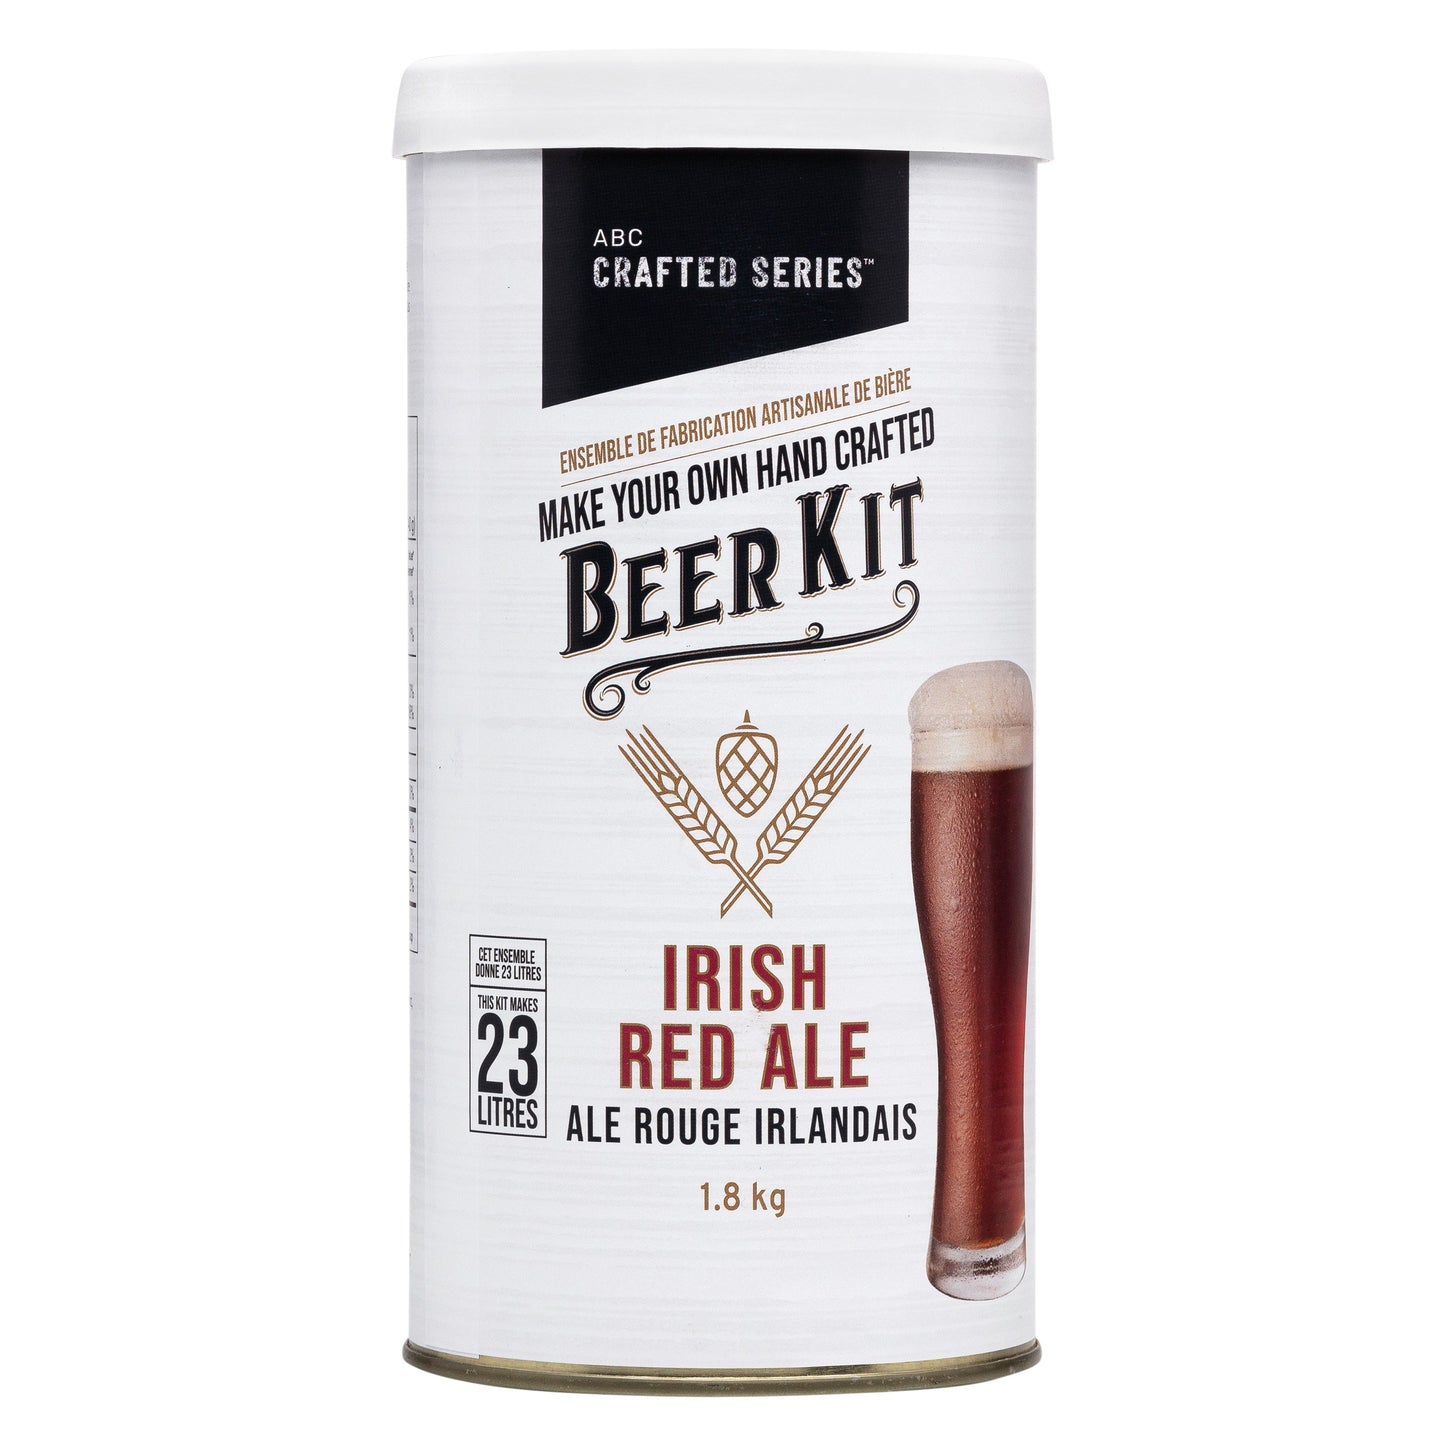 ABC Crafted Series Irish Red Ale